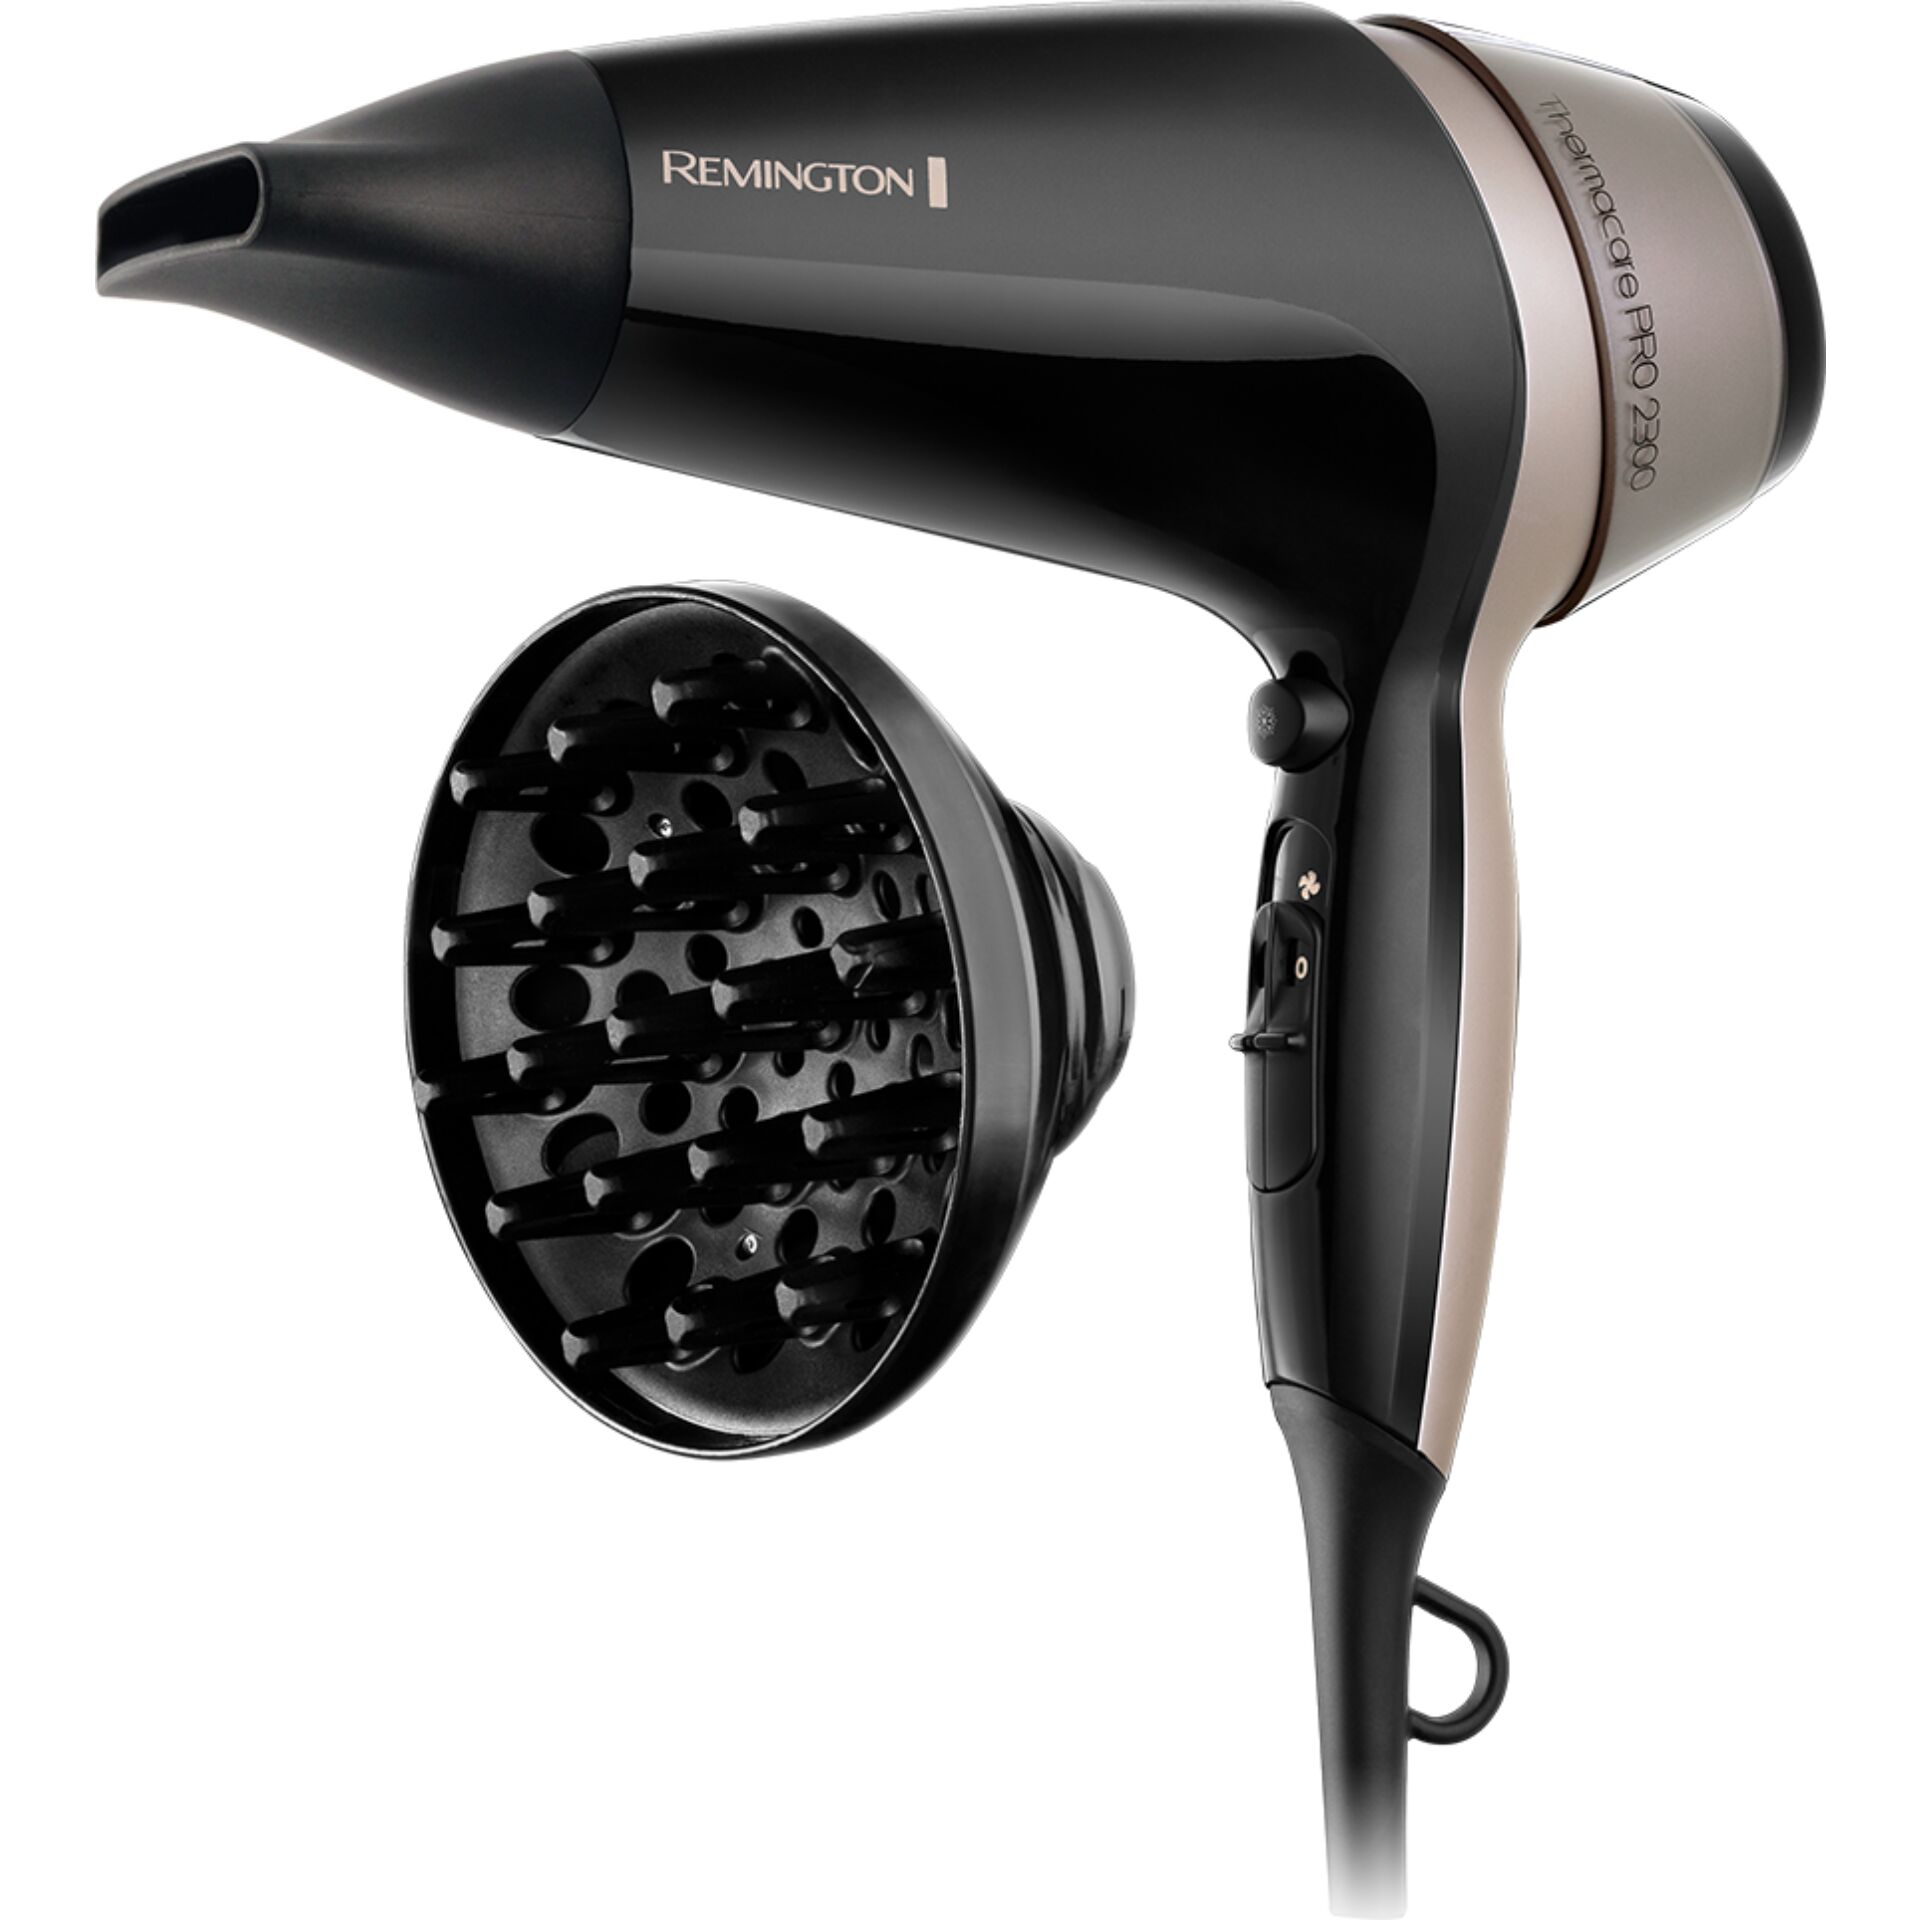 Remington Thermacare Pro 2300 hair dryer 2300 W Black, Brown